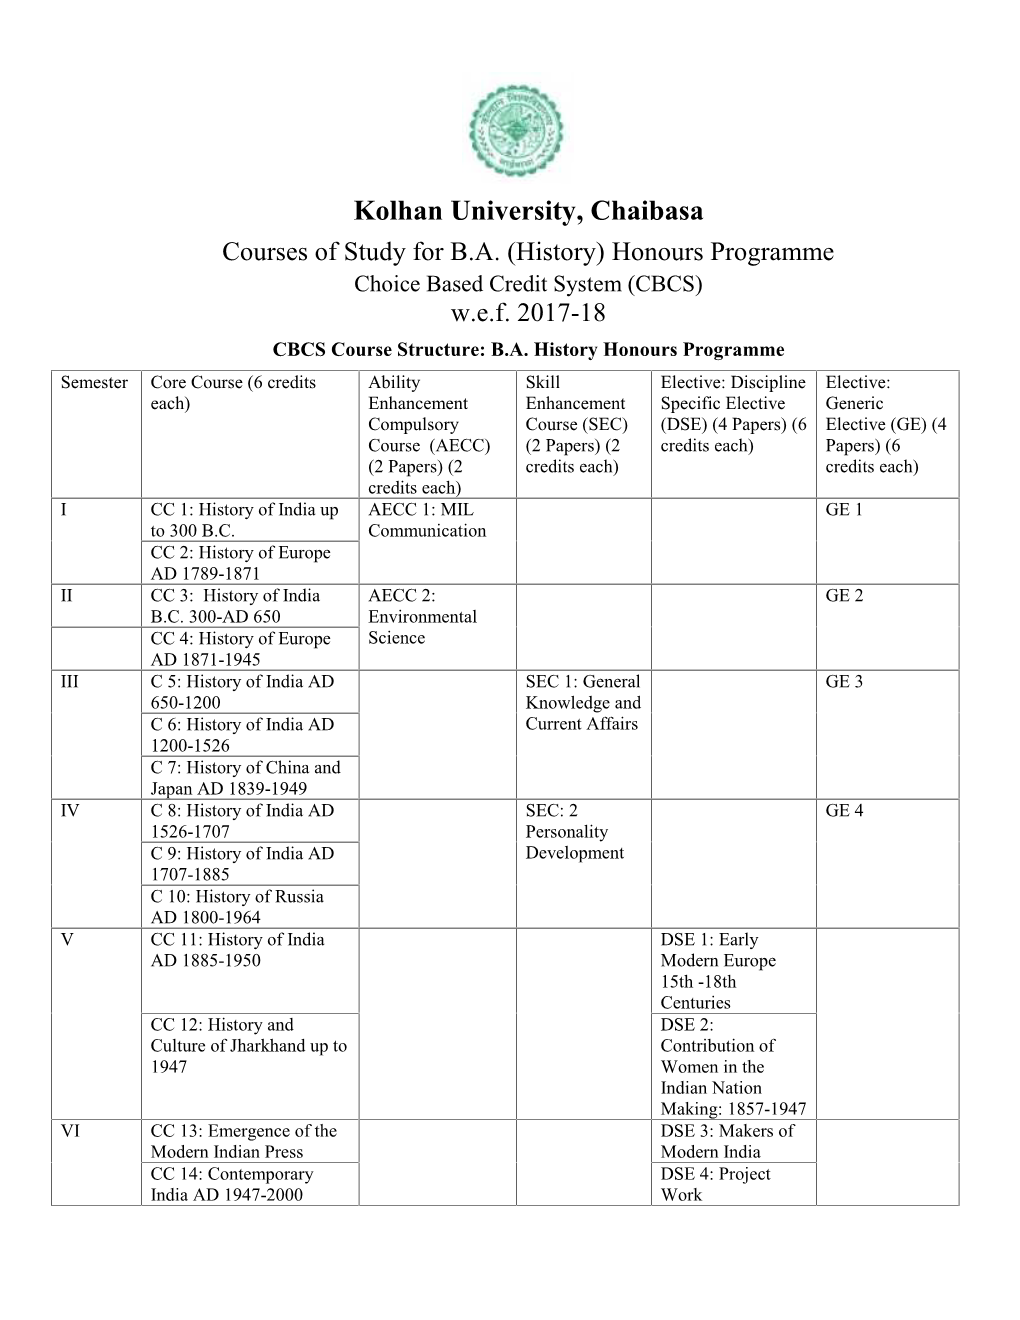 Kolhan University, Chaibasa Courses of Study for B.A